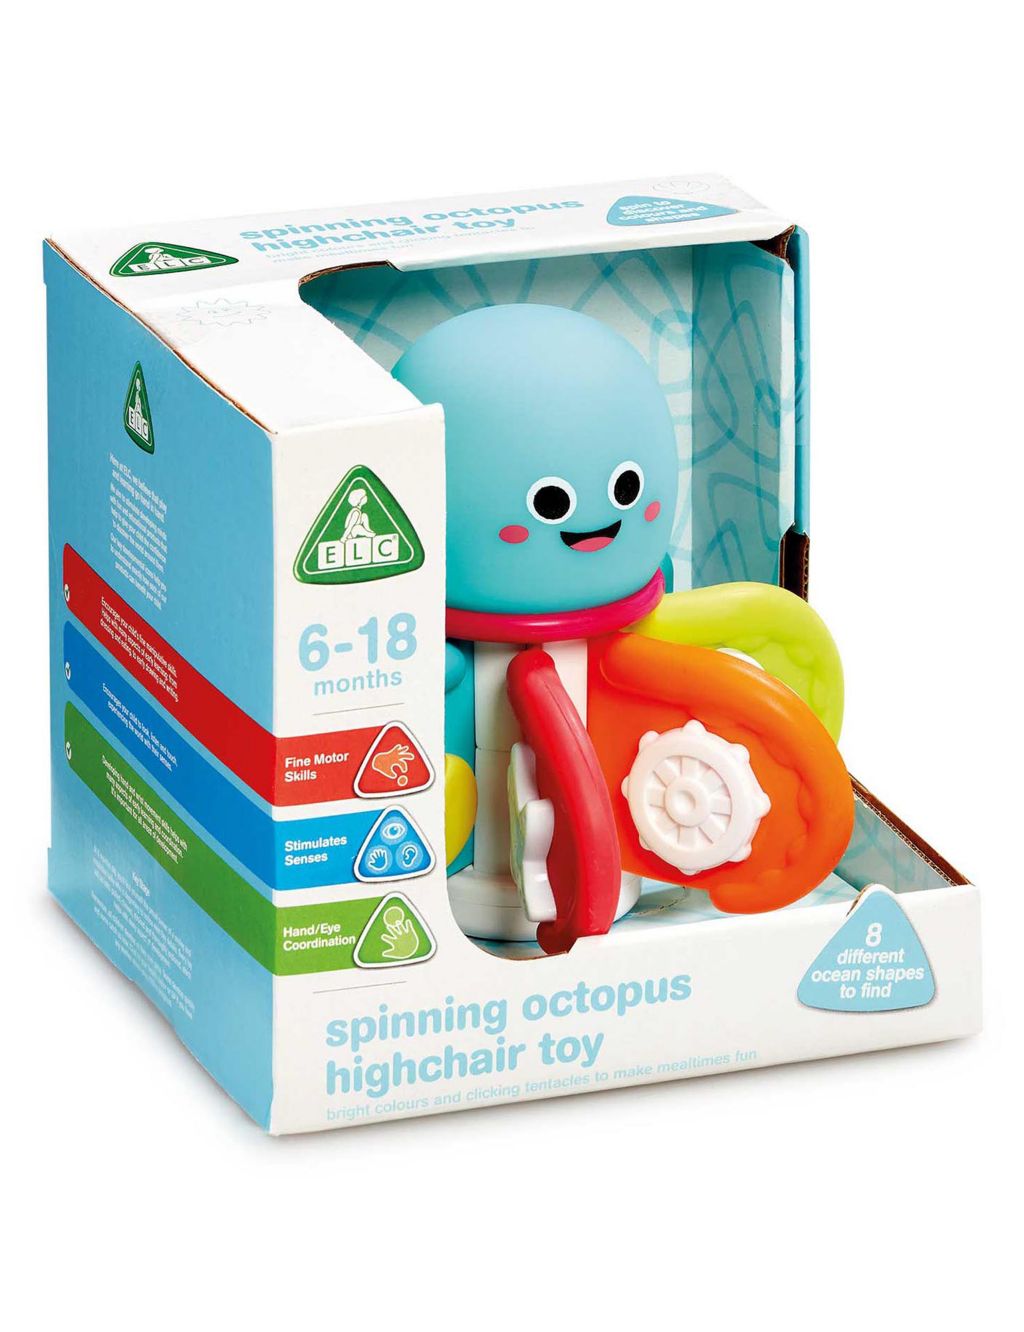 Spinning Octopus Highchair Toy (6-18 Mths) image 3